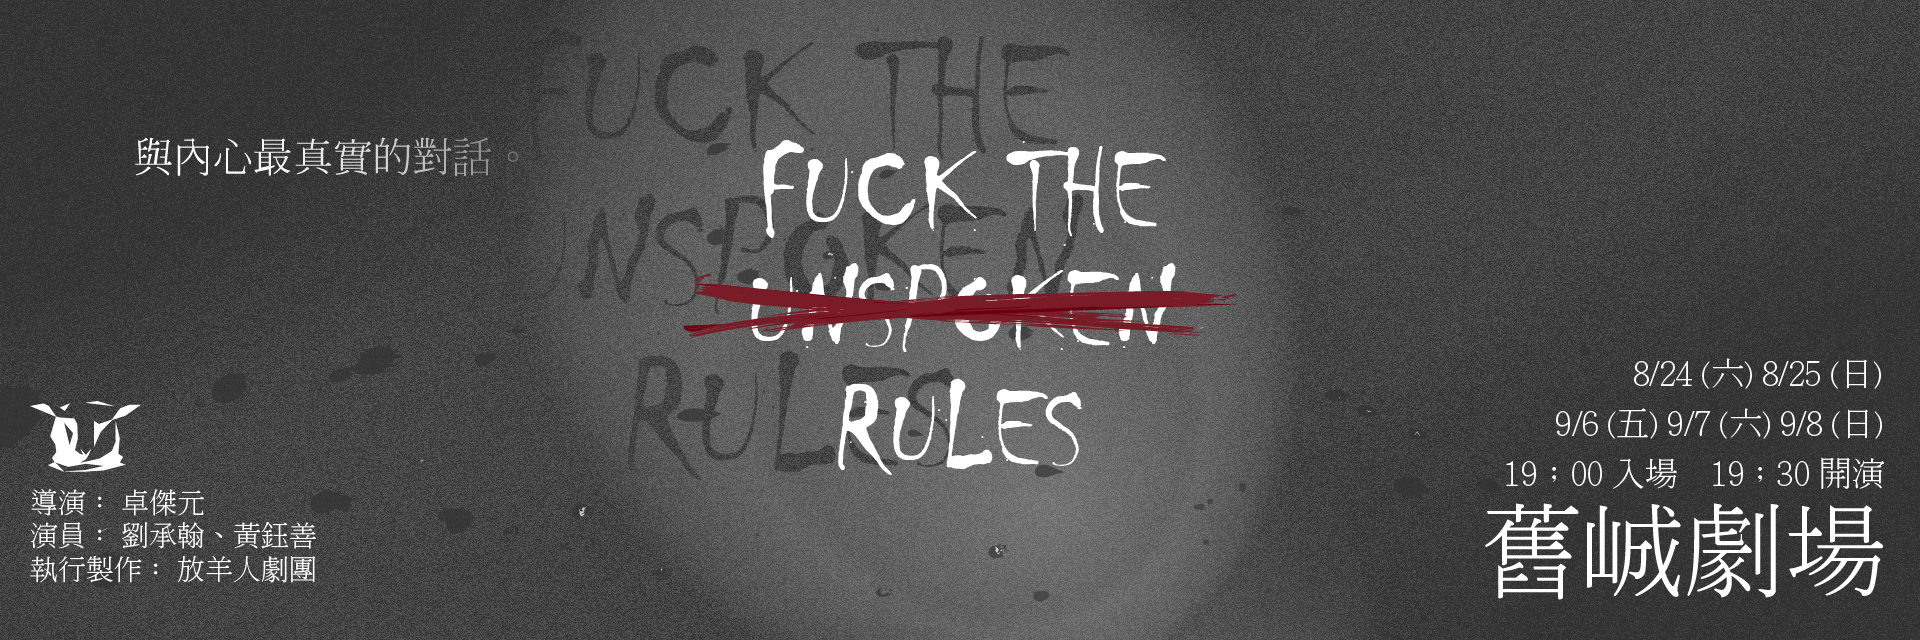 Fuck The Unspoken Rules 主要圖片